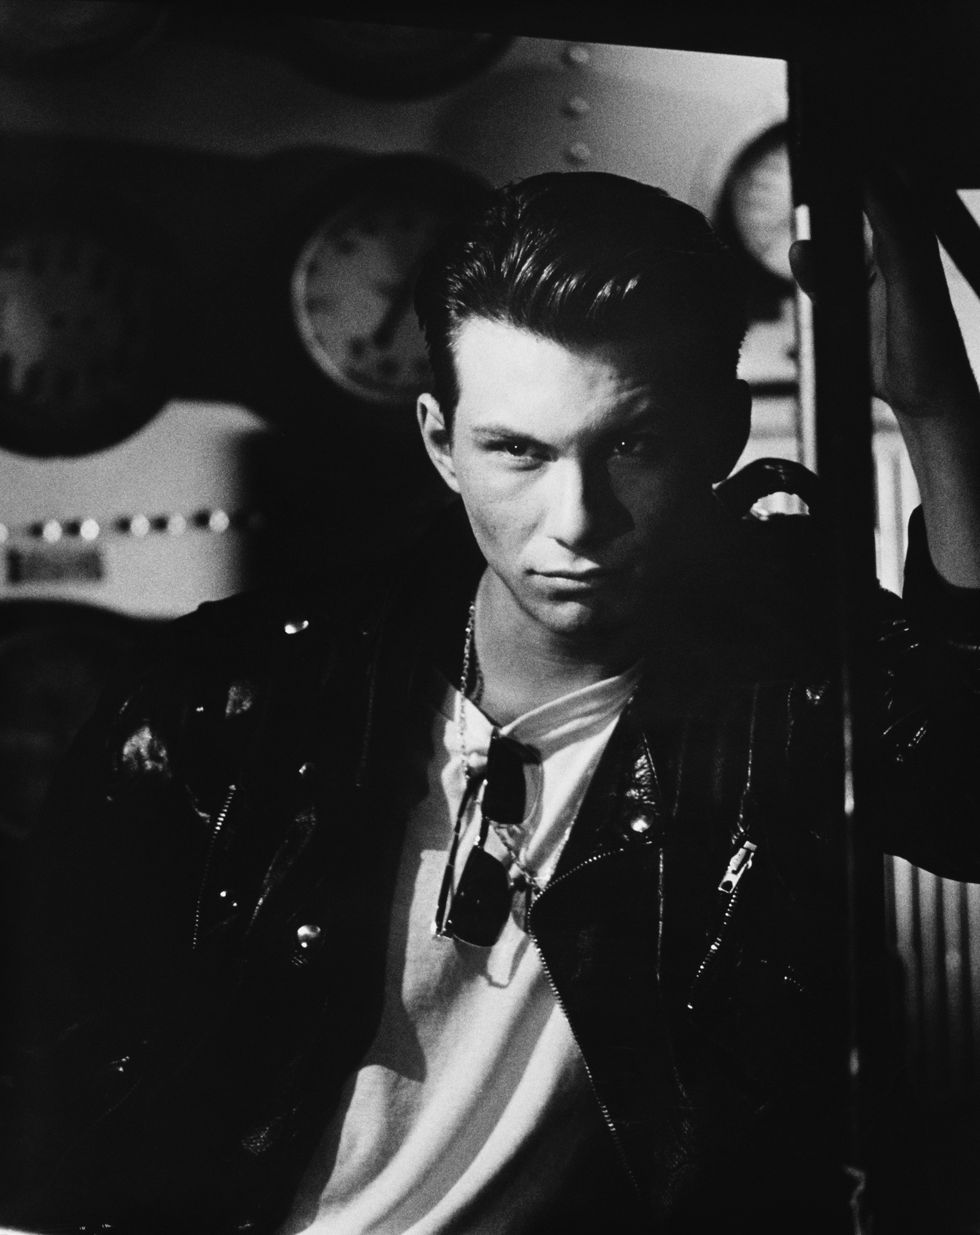 christian slater in leather jacket photo by © aaron rapoportcorbis outlinecorbis via getty images